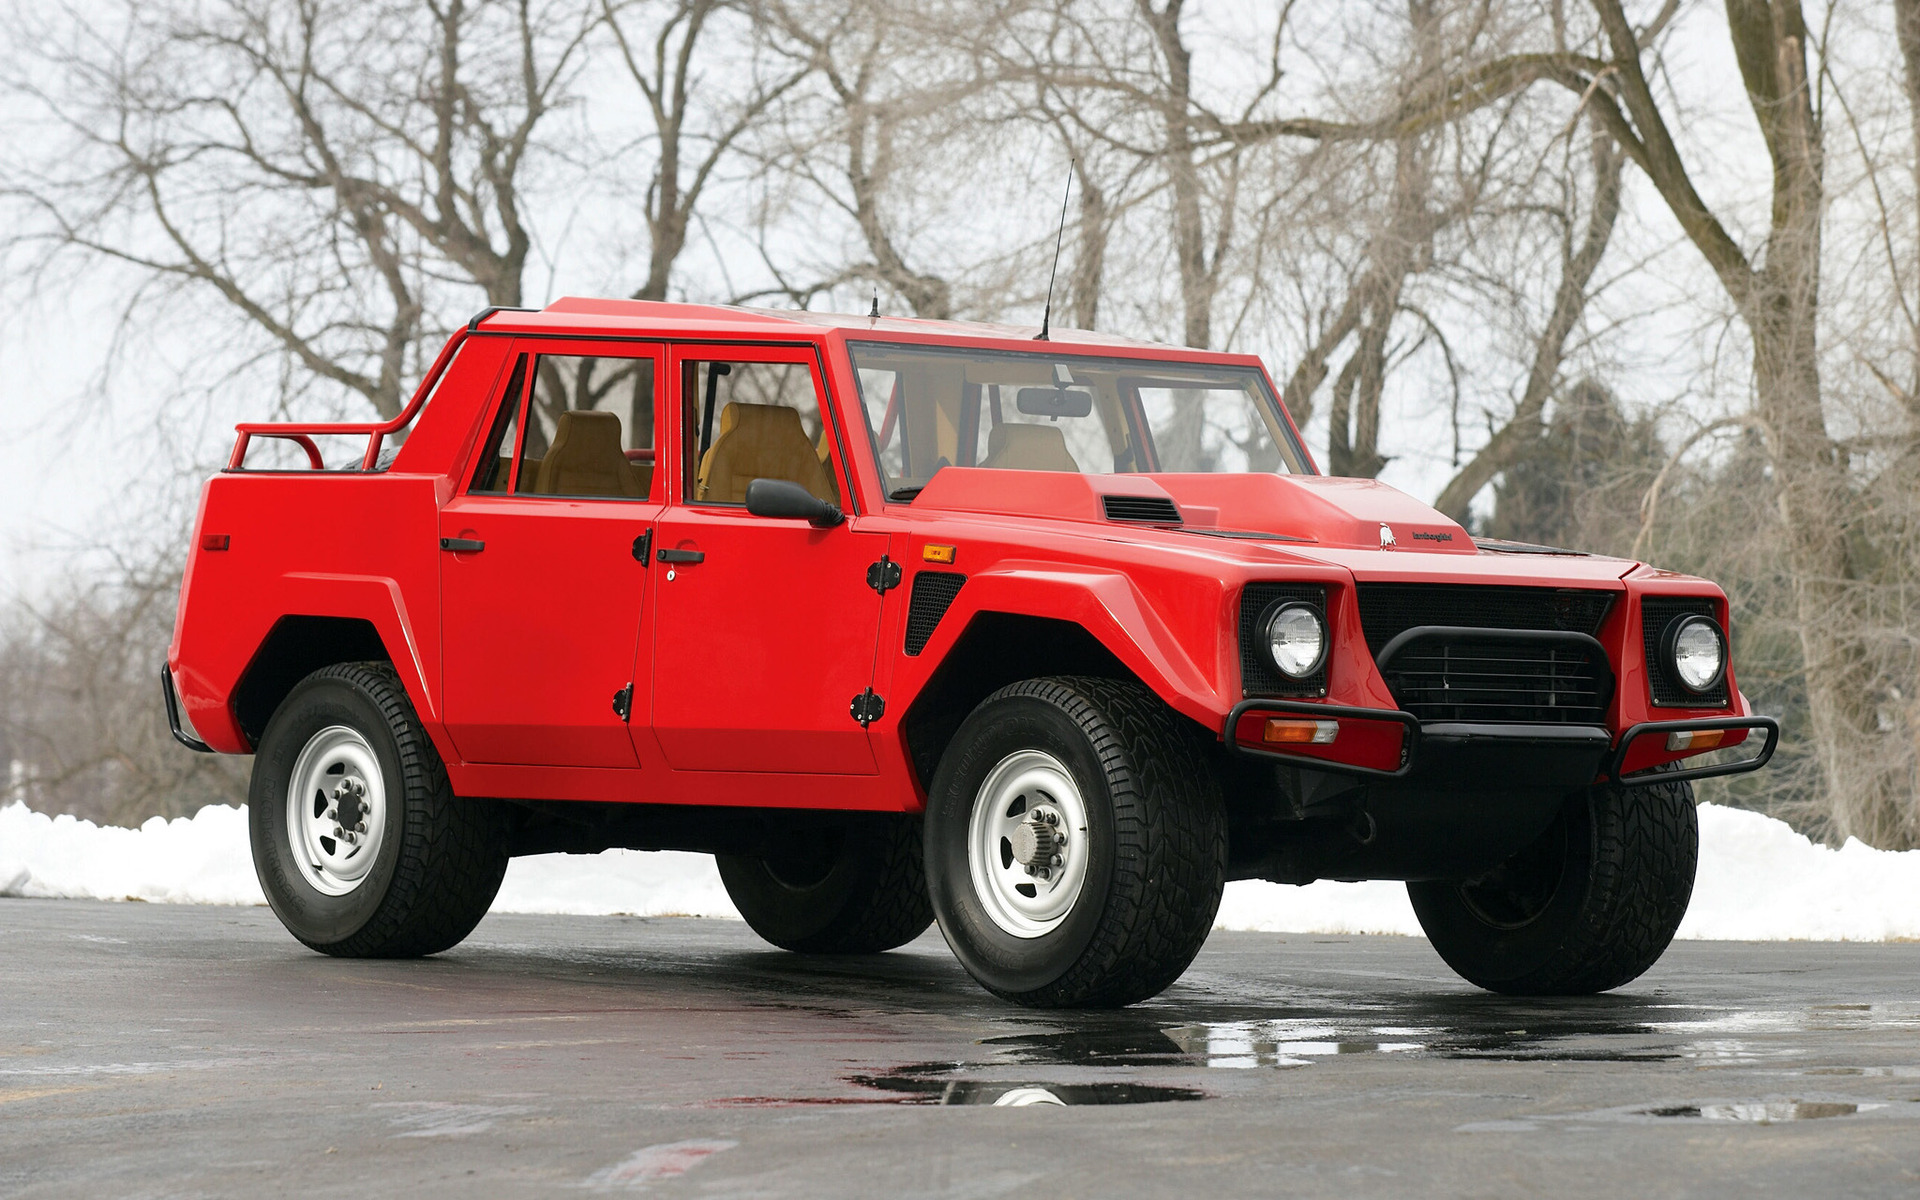 Lamborghini lm002, off-road car wallpapers and images ...